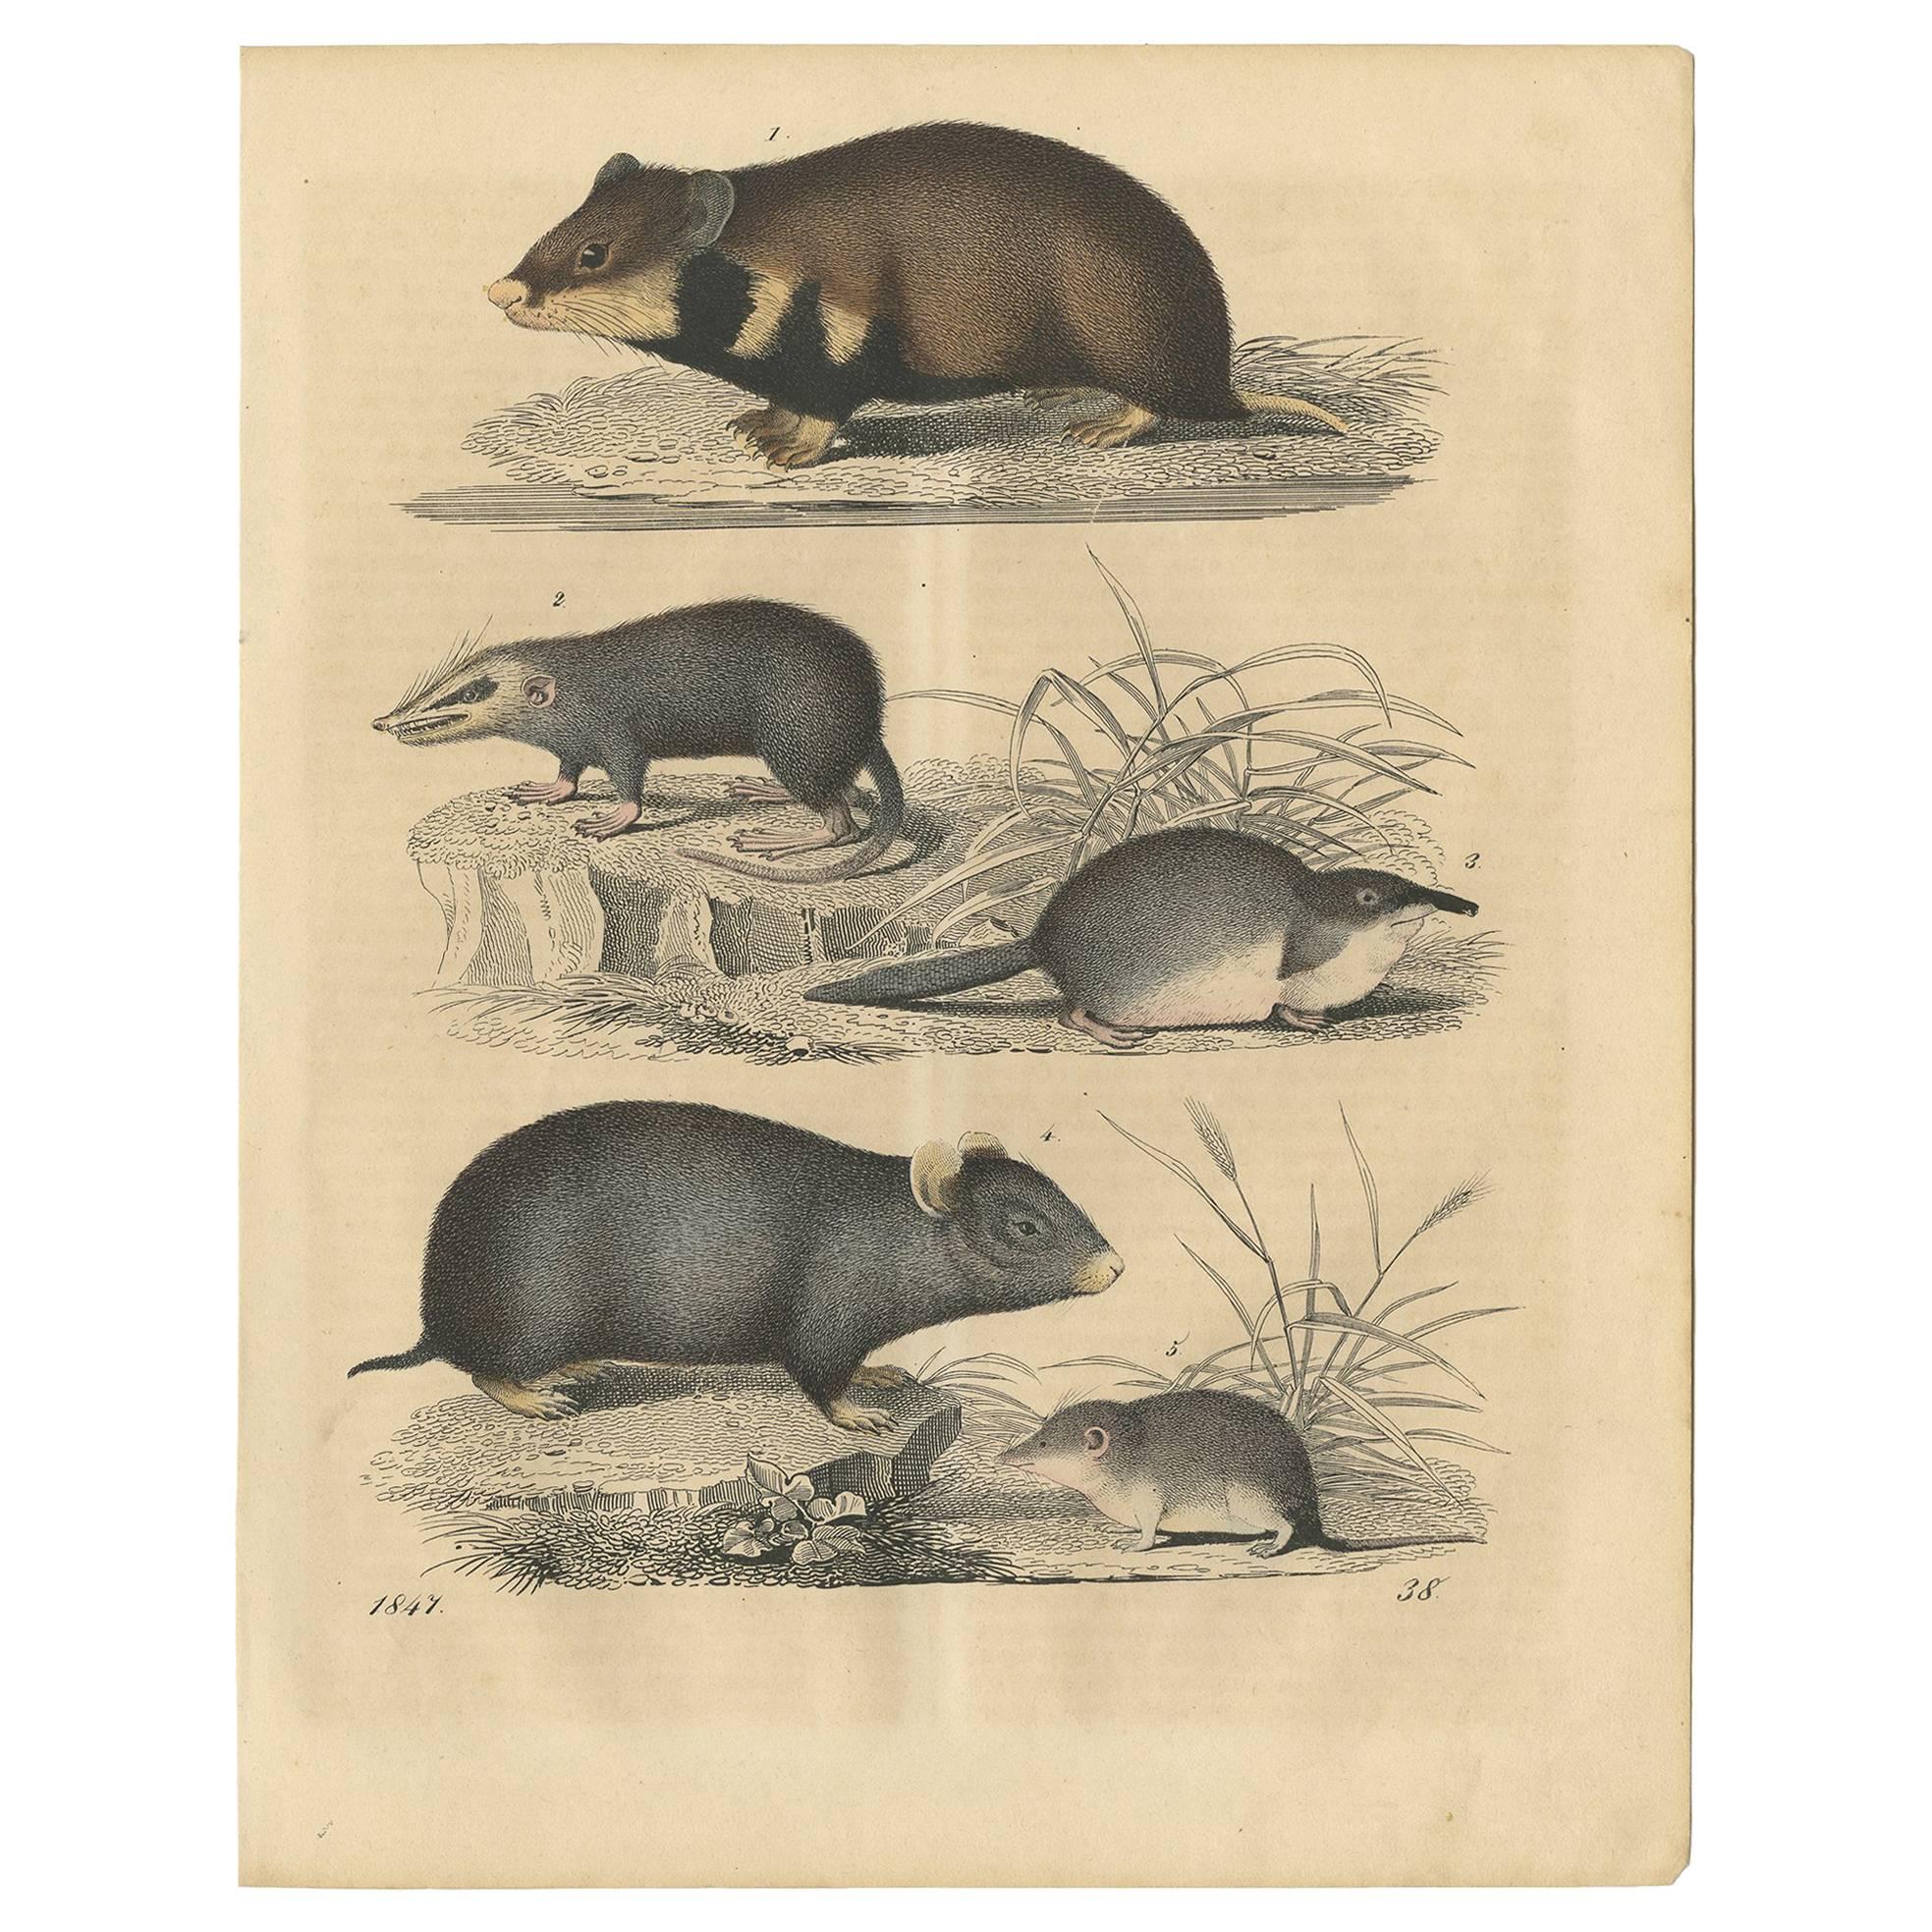 Antique Animal Print of Rodents by C. Hoffmann, 1847